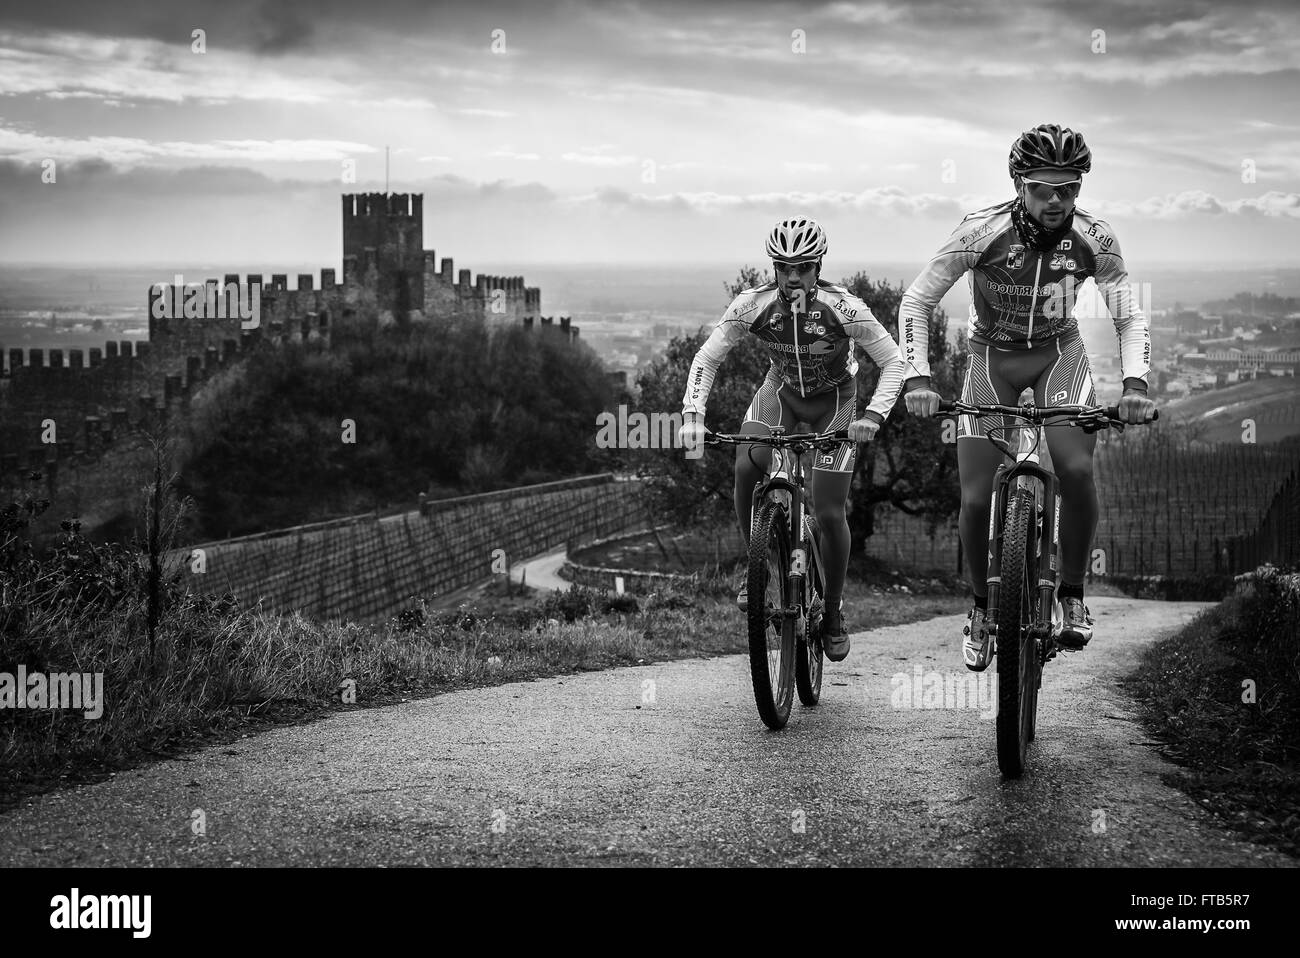 Soave, Italy - March 27, 2016: Cyclists train after a storm on the hills surrounding the castle of Soave. Stock Photo